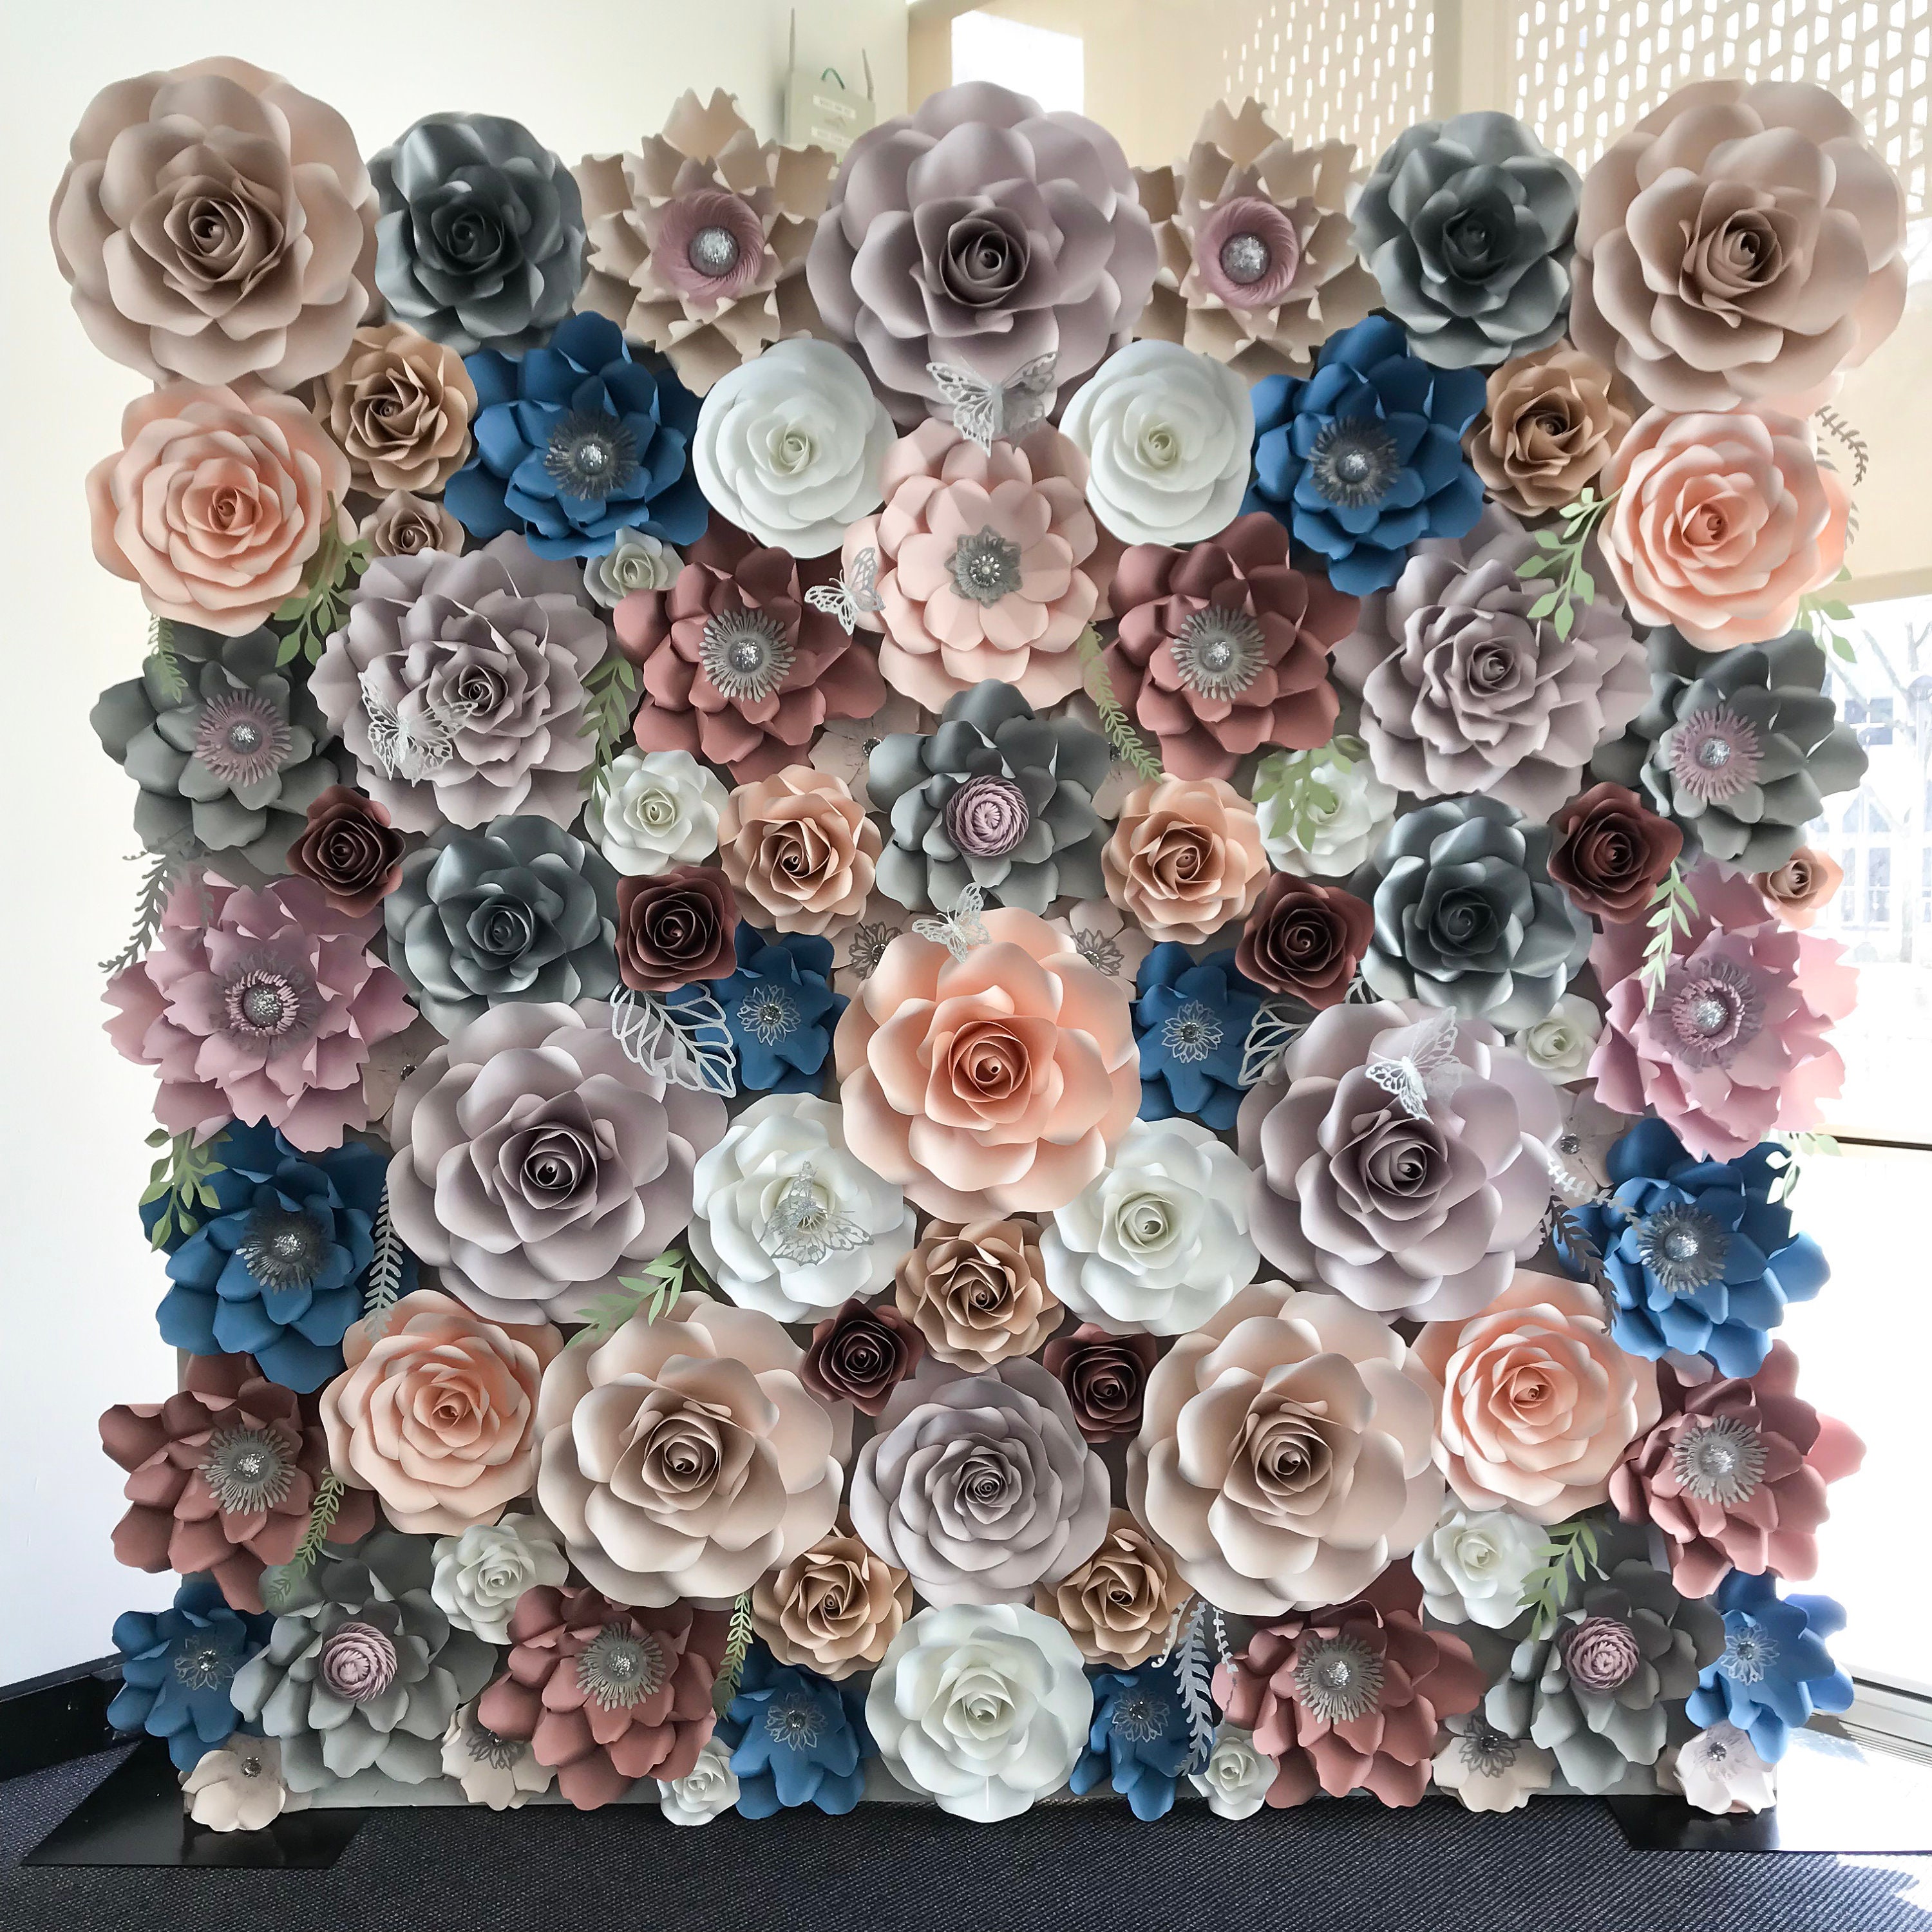 Tutorial On Building A Massive Paper Flower Wall For Weddings Etsy